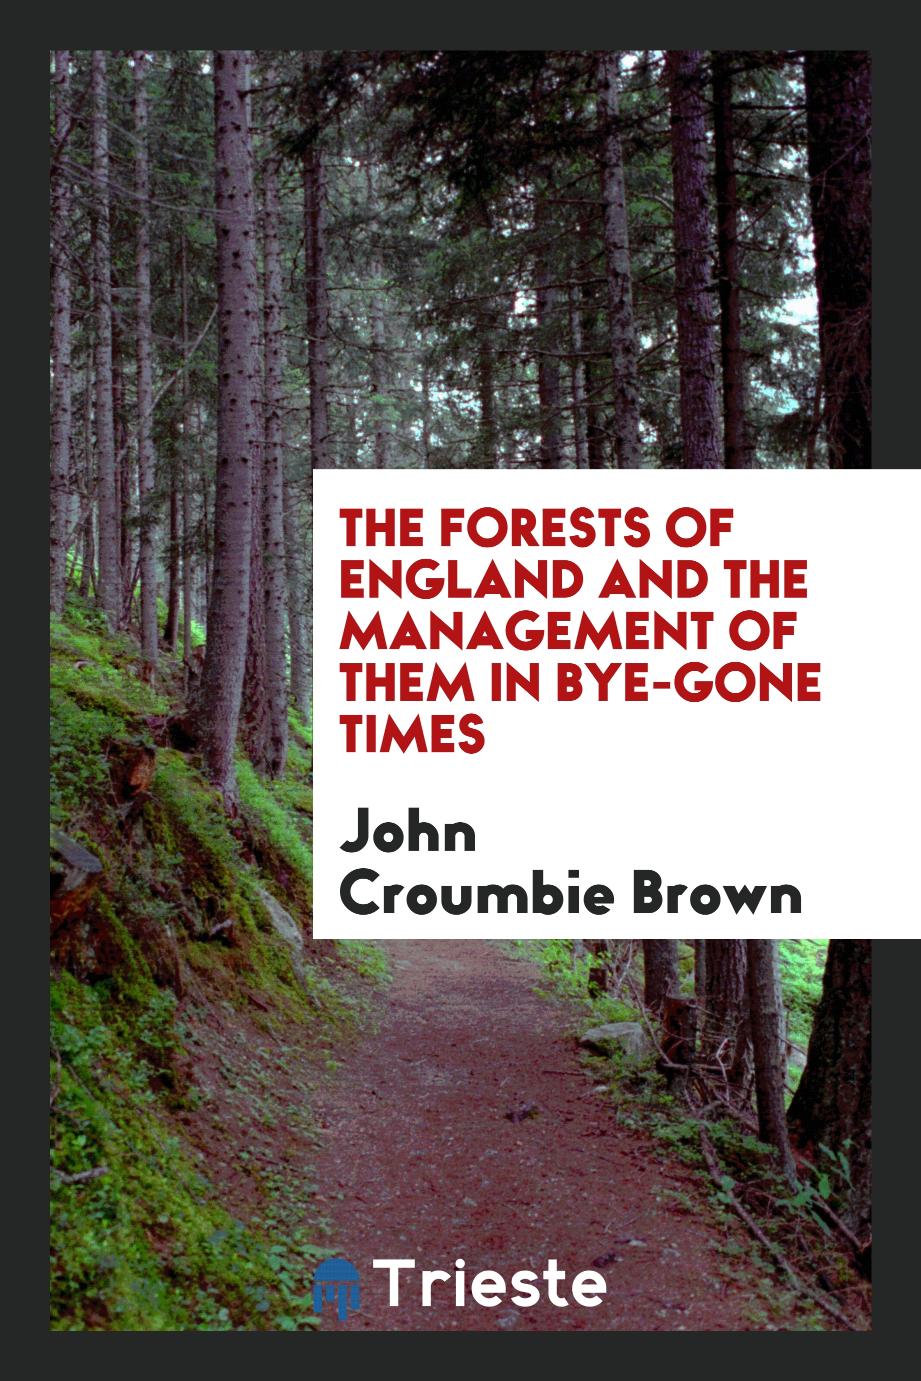 The Forests of England and the Management of Them in Bye-Gone Times